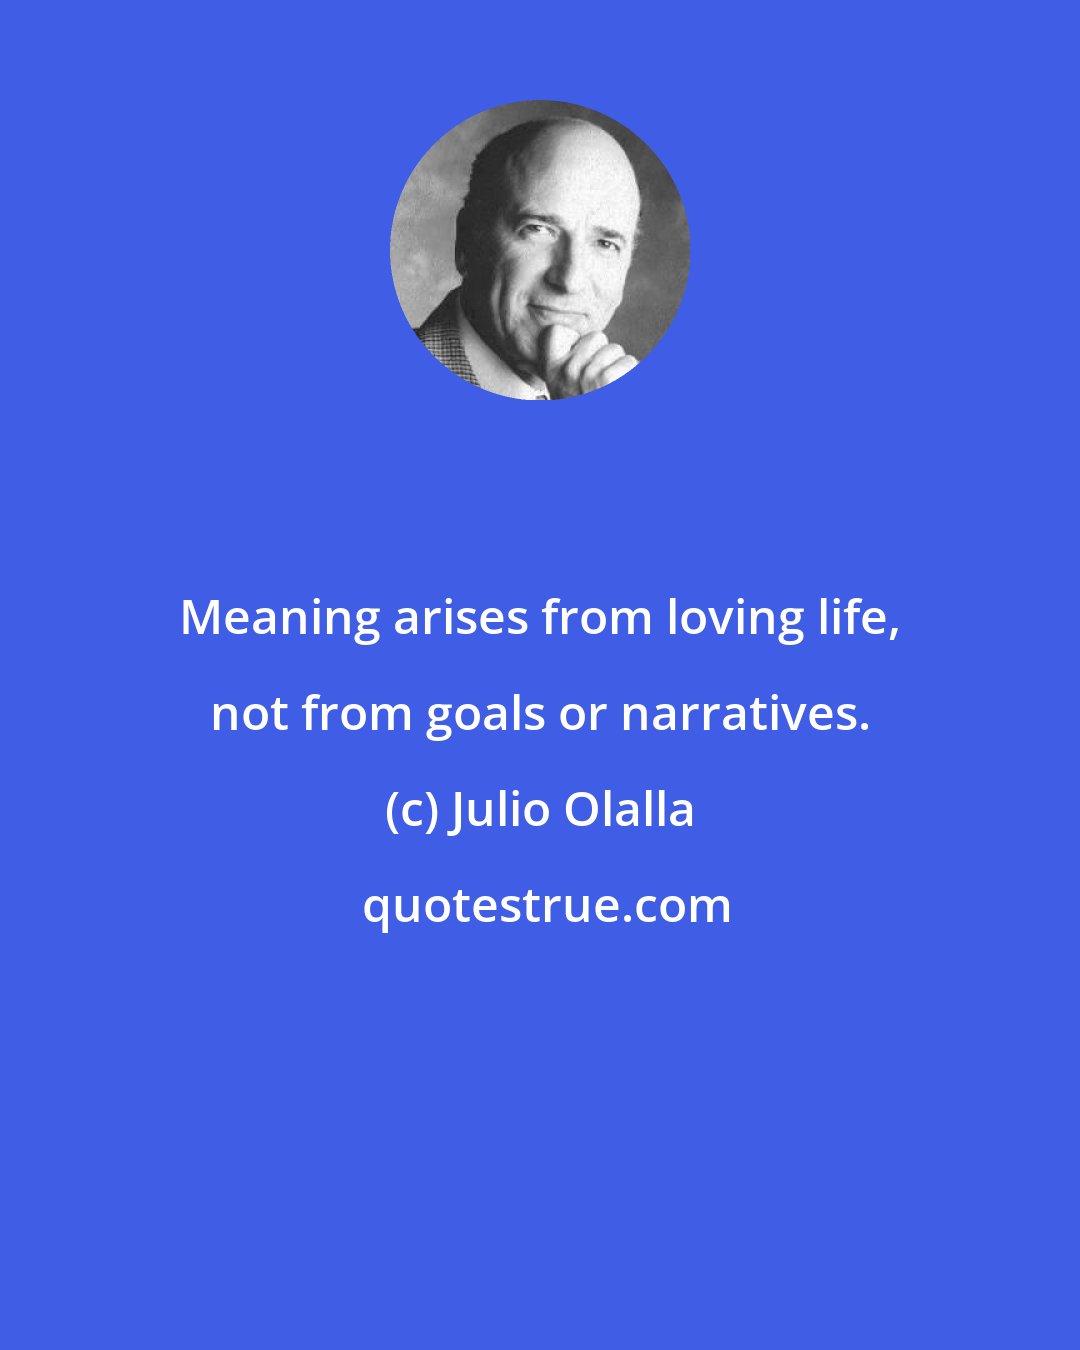 Julio Olalla: Meaning arises from loving life, not from goals or narratives.